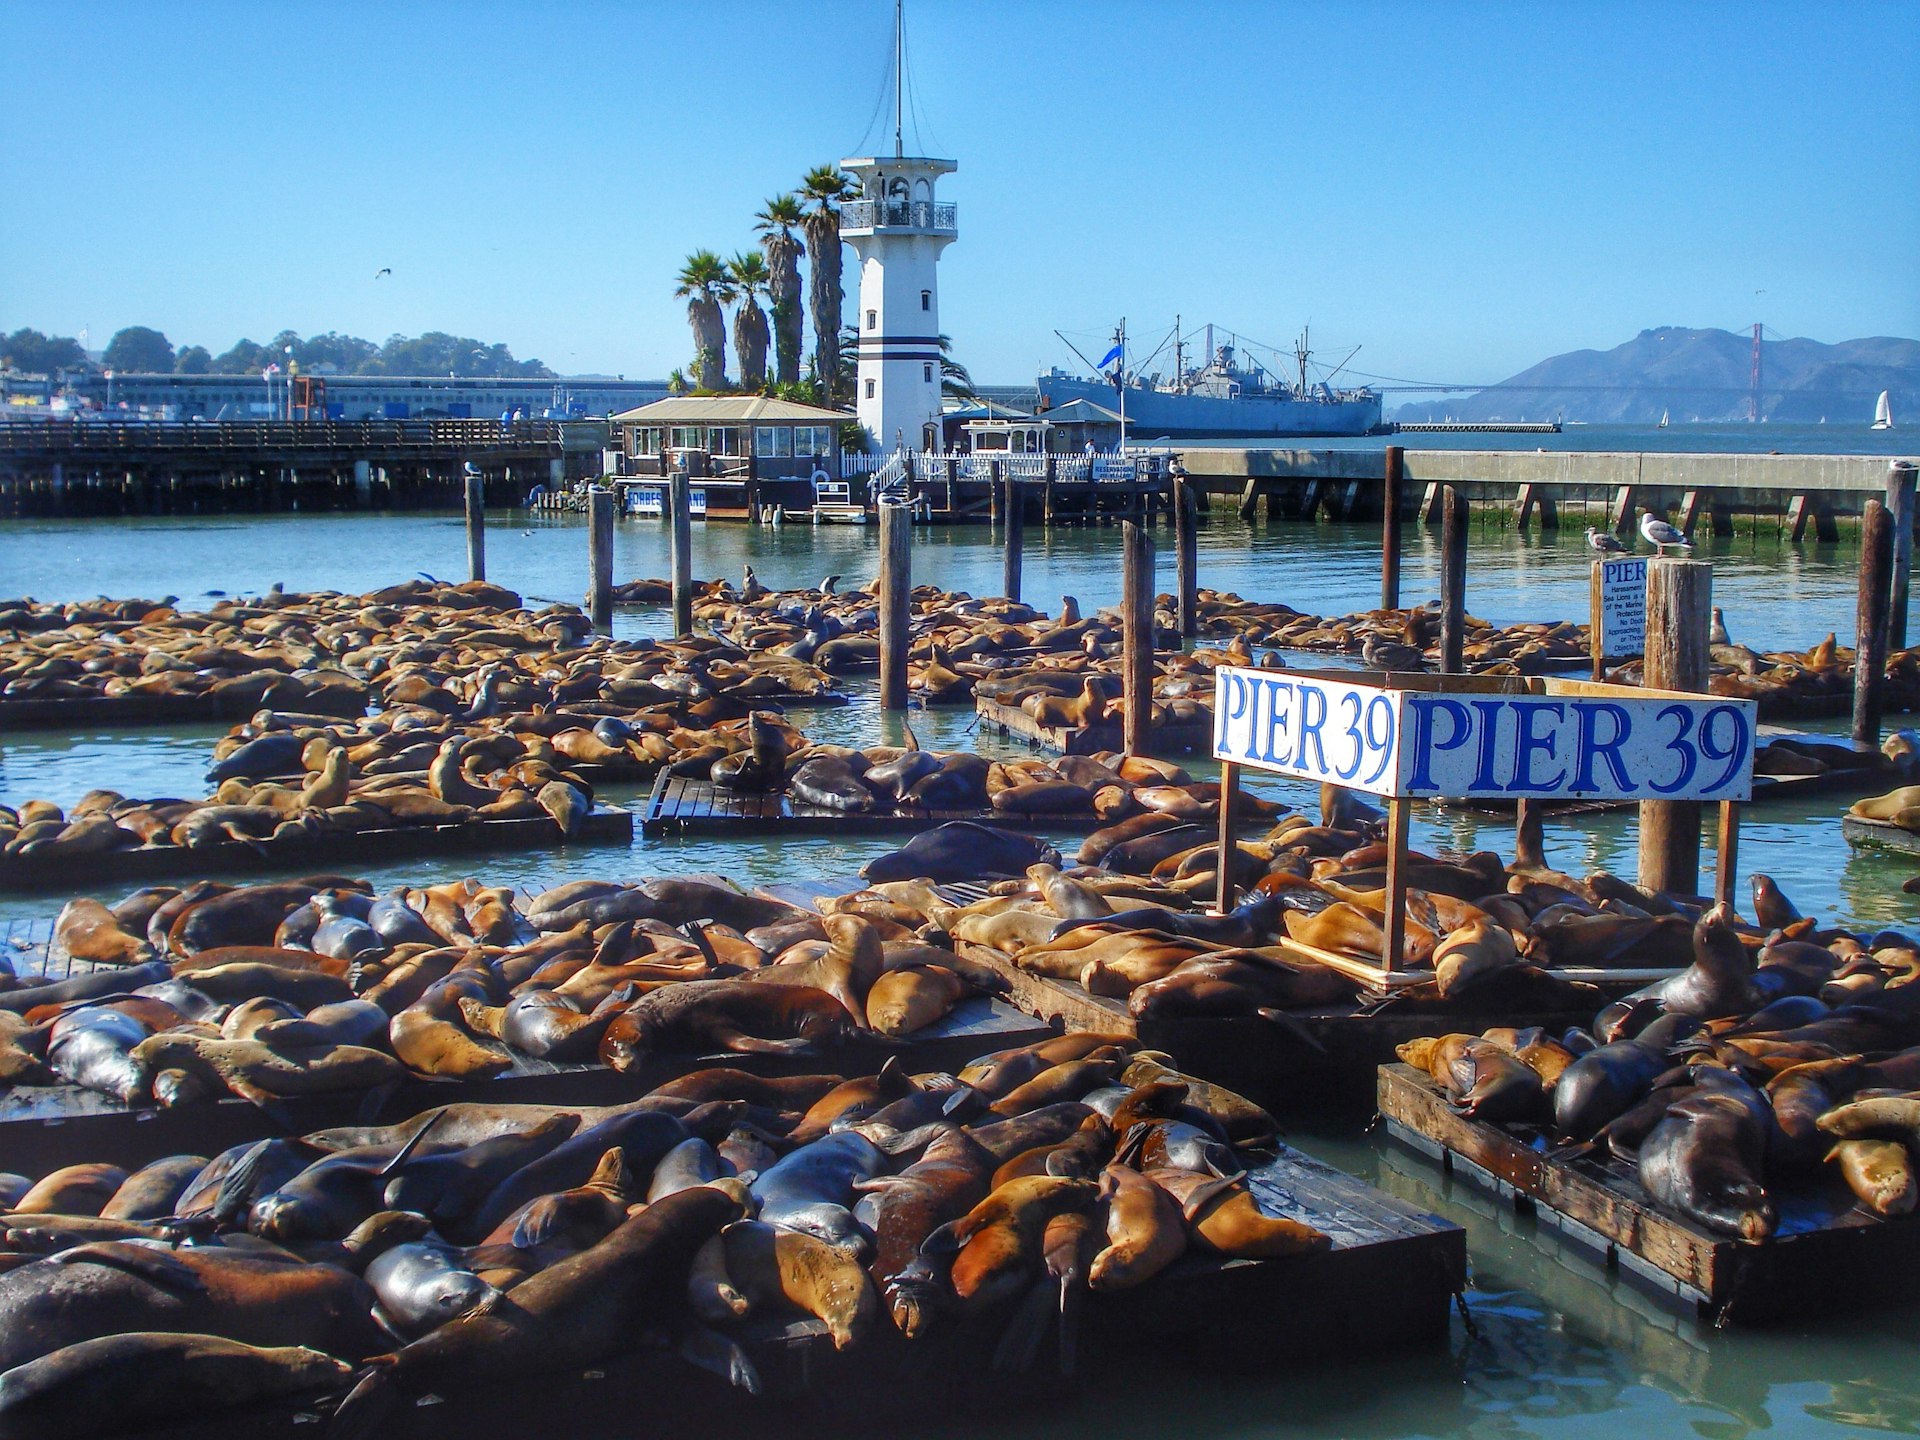 Hundreds of brown sea lions lounge in the sun on jetties under a sign that says 